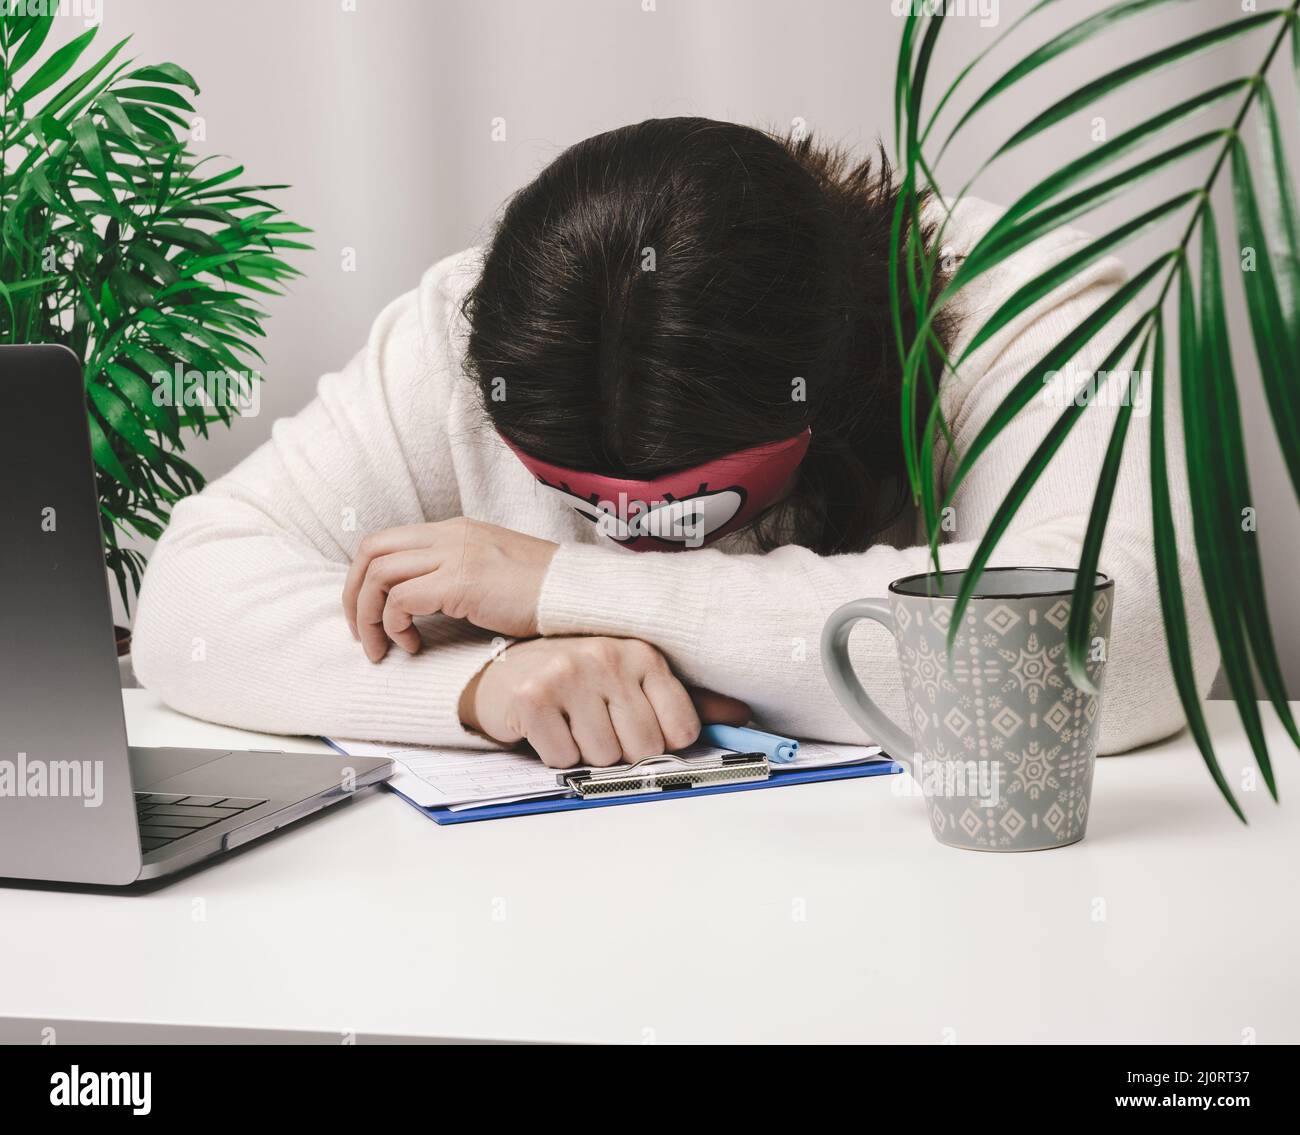 Woman in a sweater sleeps at a work table, next to a laptop. Fatigue and overwork concept. Laziness Stock Photo